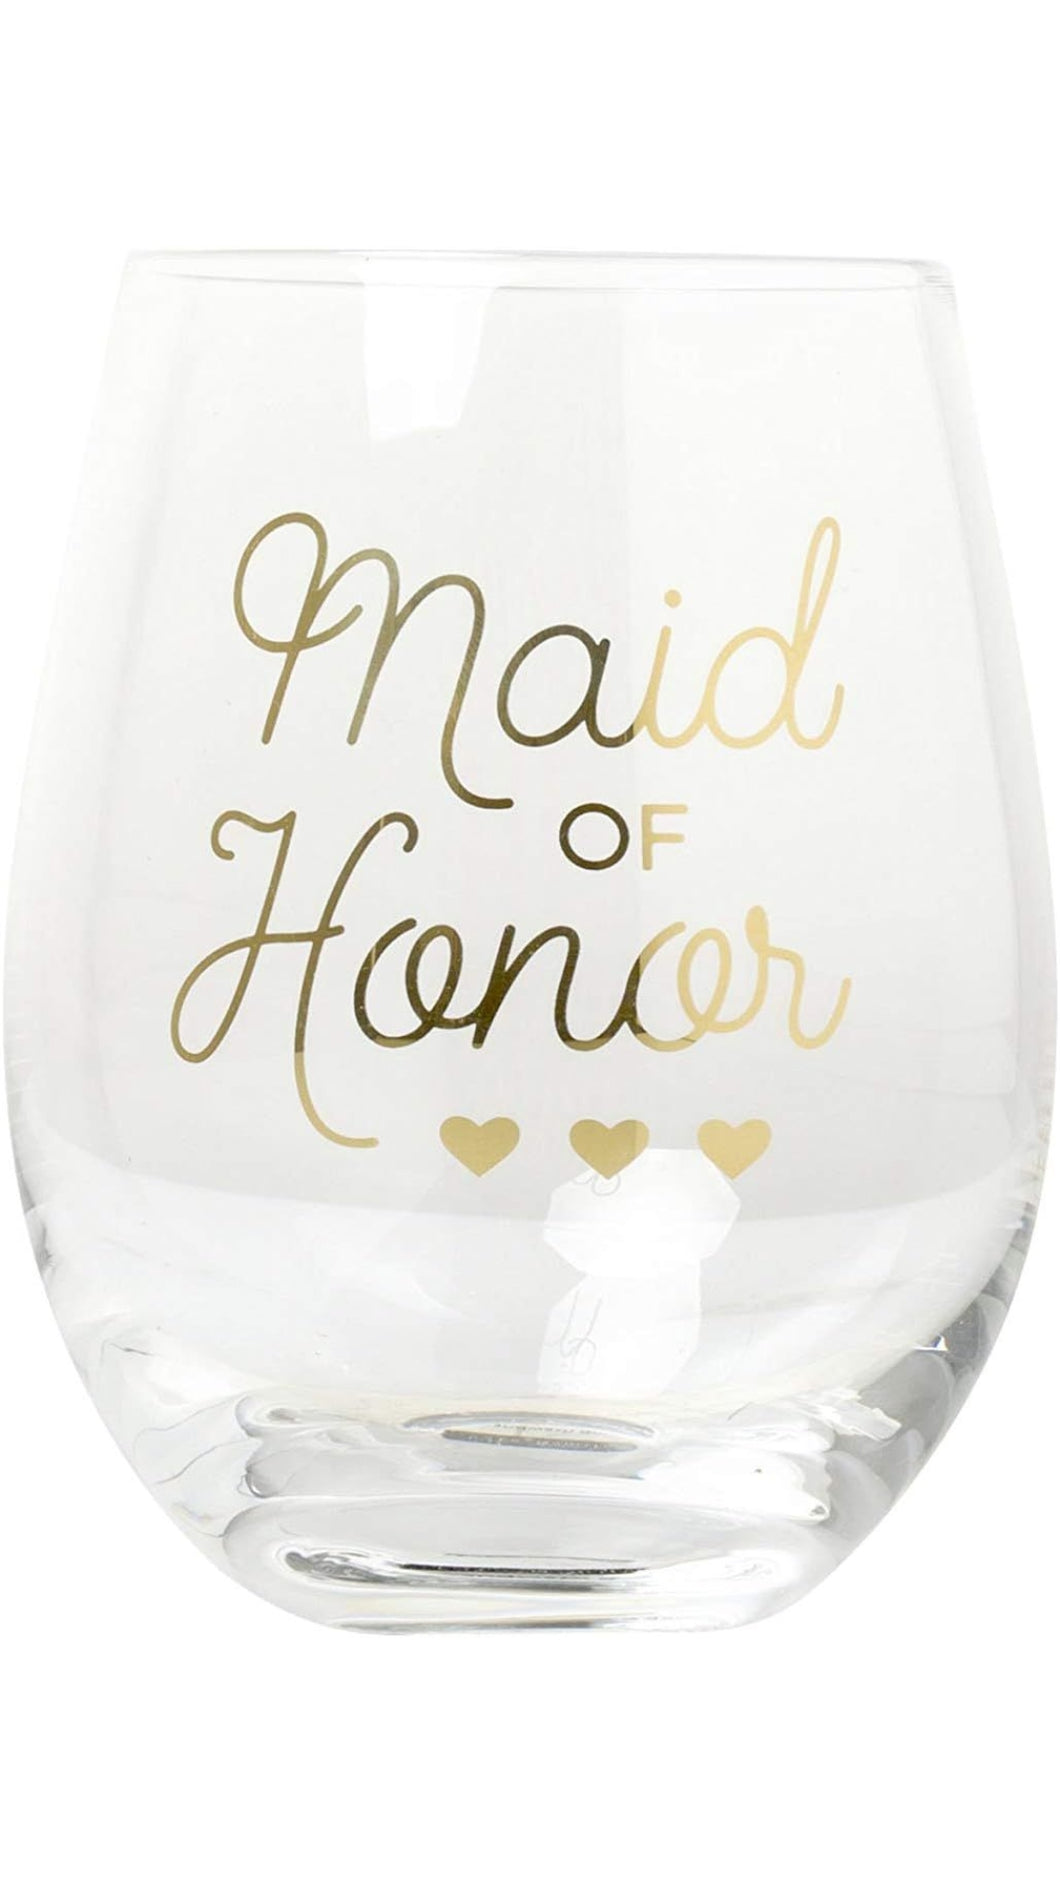 Maid of Honor Stemless